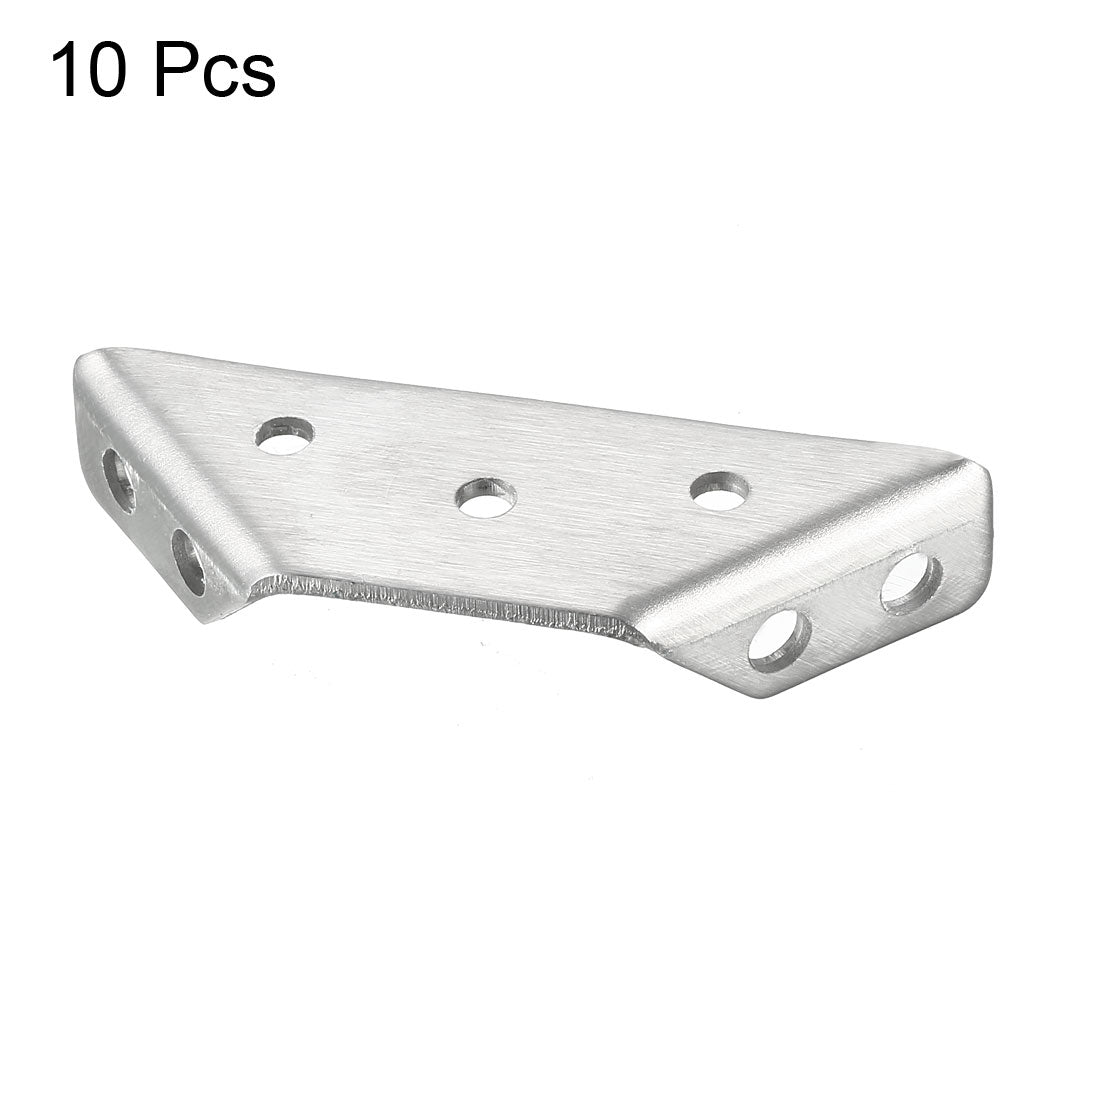 uxcell Uxcell Shelf Angle Bracket Joining Support Corner Brace, 50mm x 50mm,Stainless Steel Silver Tone, 10Pcs